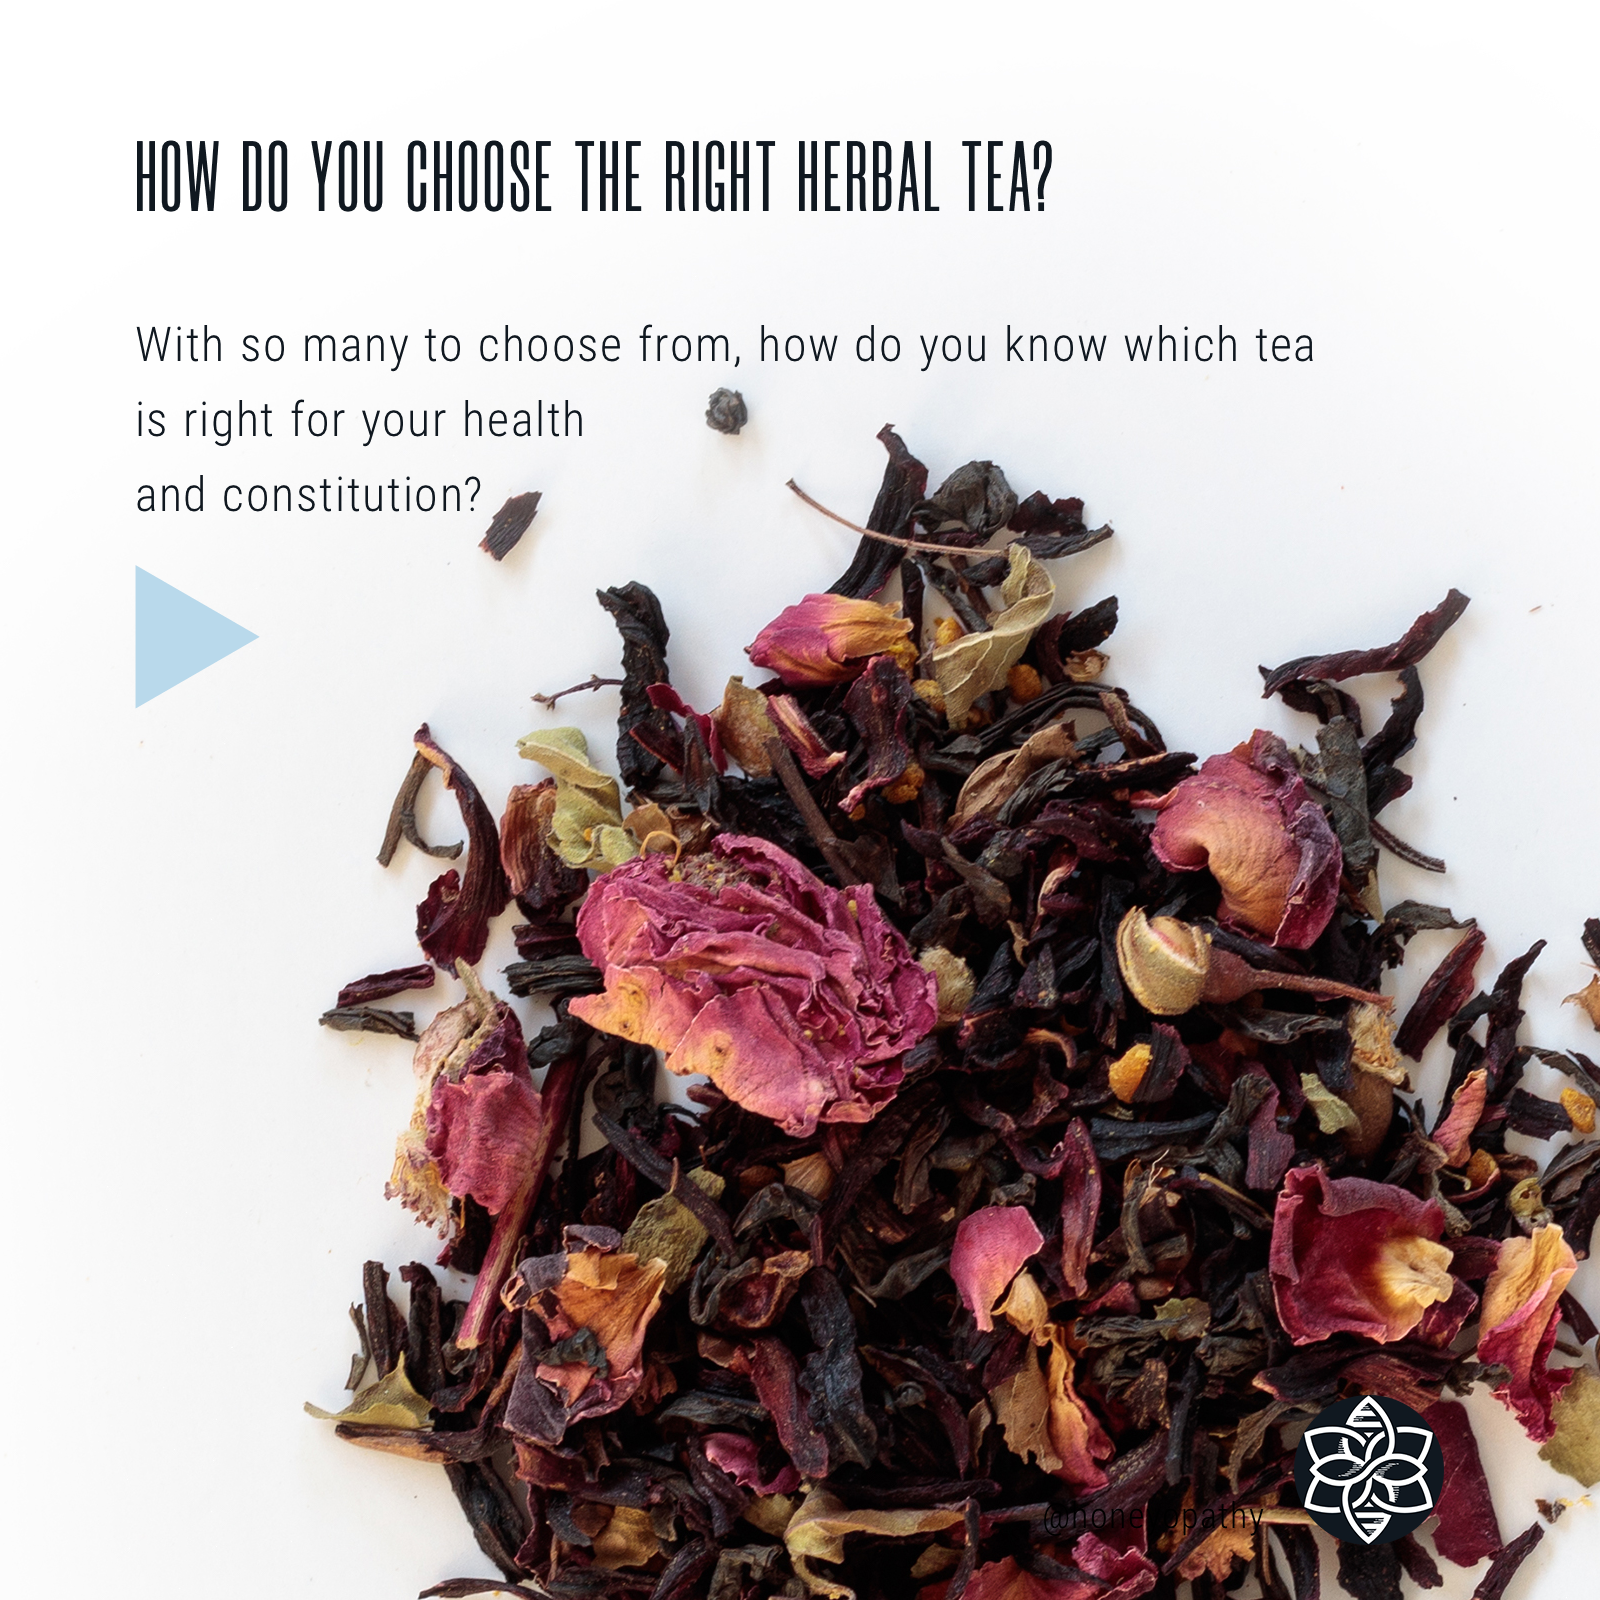 How to determine which loose leaf herbal tea is best for my overall health? Answer: Start with organic and then the blend